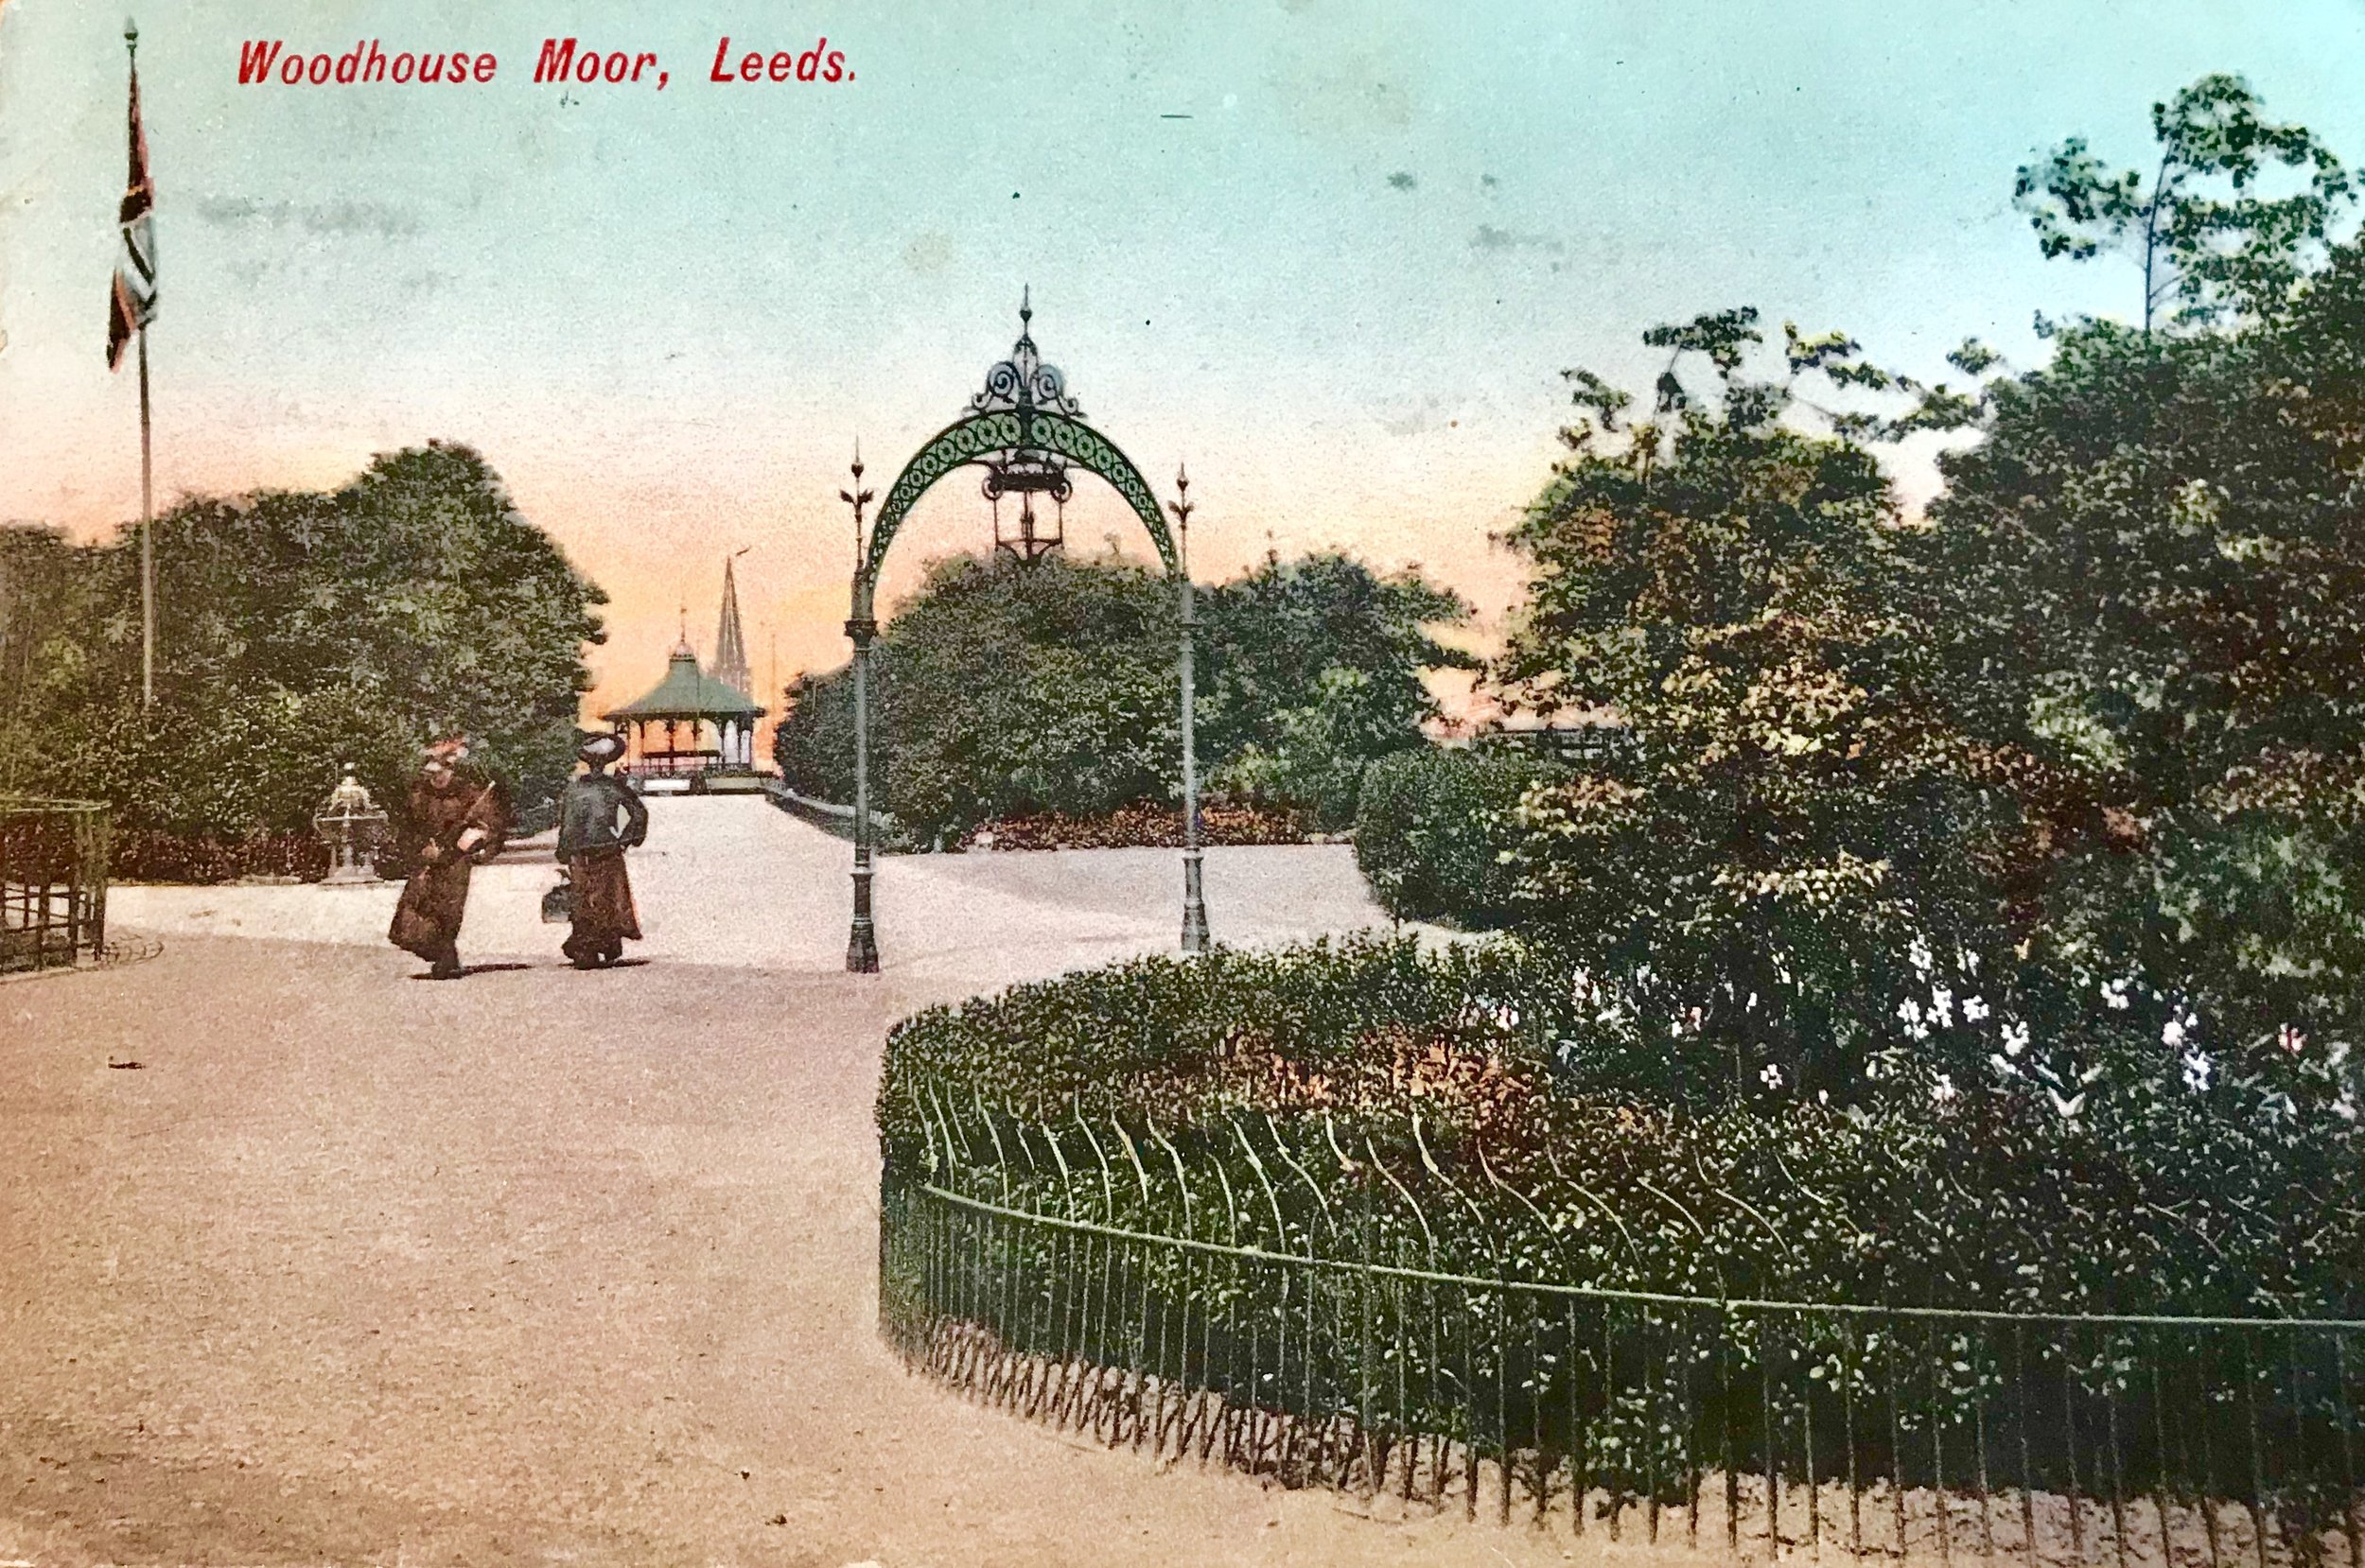 Ornamental Arch with Gas Lamp, undated